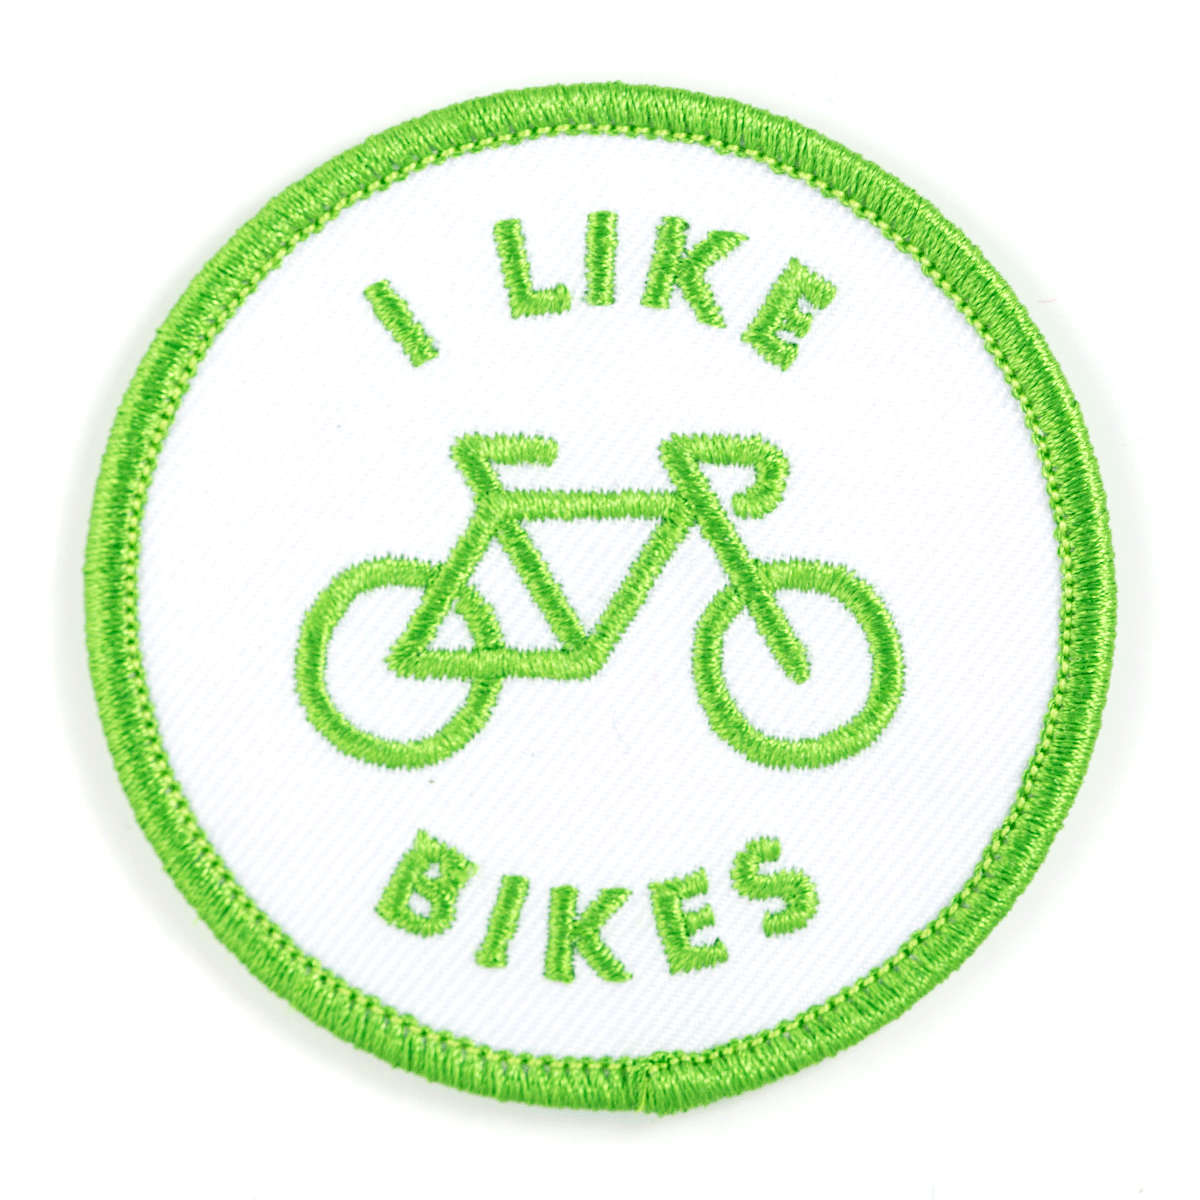 I Like Bikes Embroidered Iron-On Patch: 2.5" wide